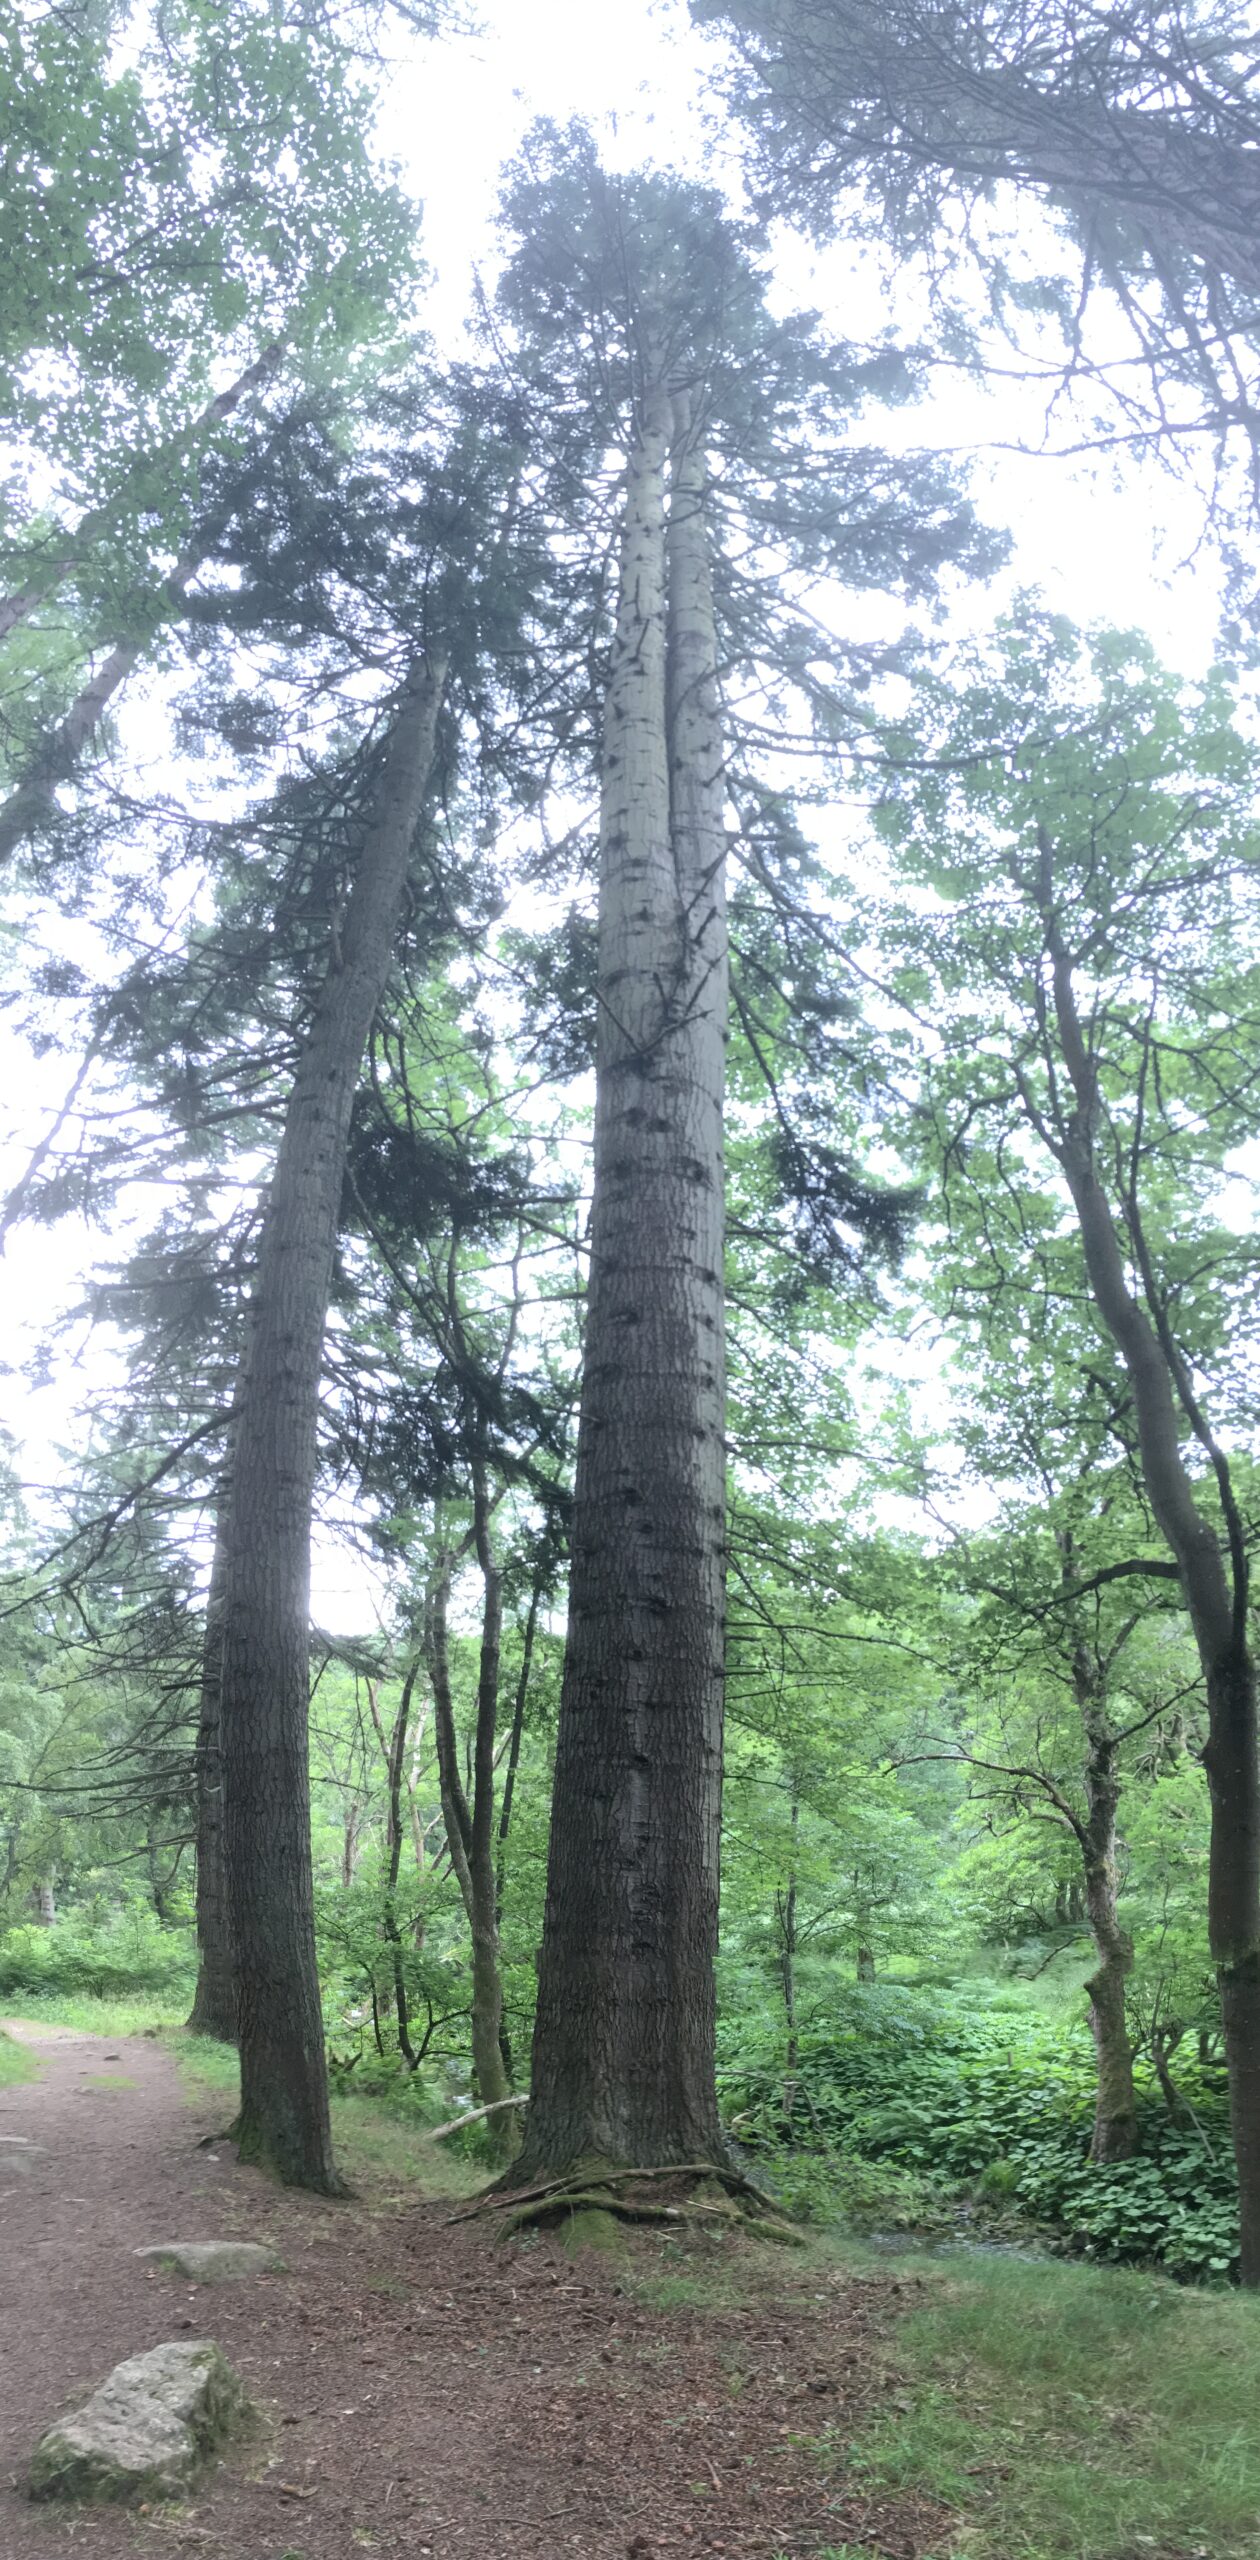 A very tall tree which forks twice